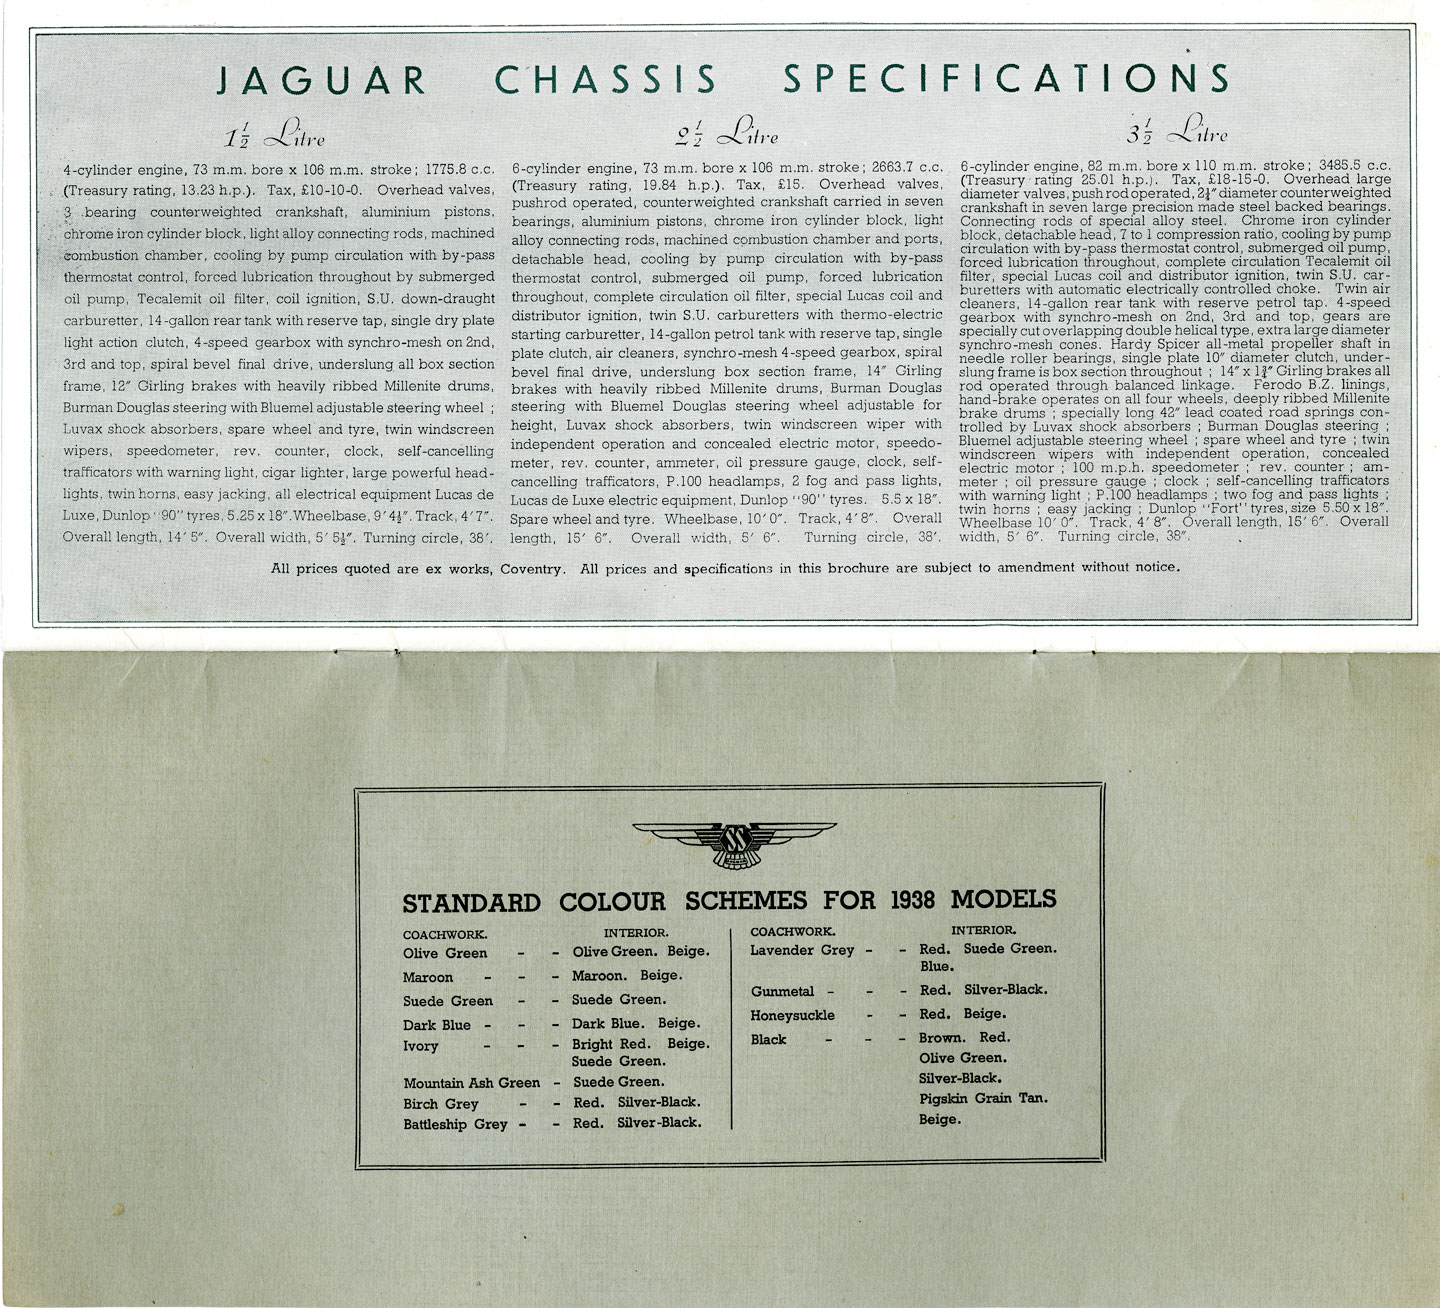 Jaguar Chassis Specifications